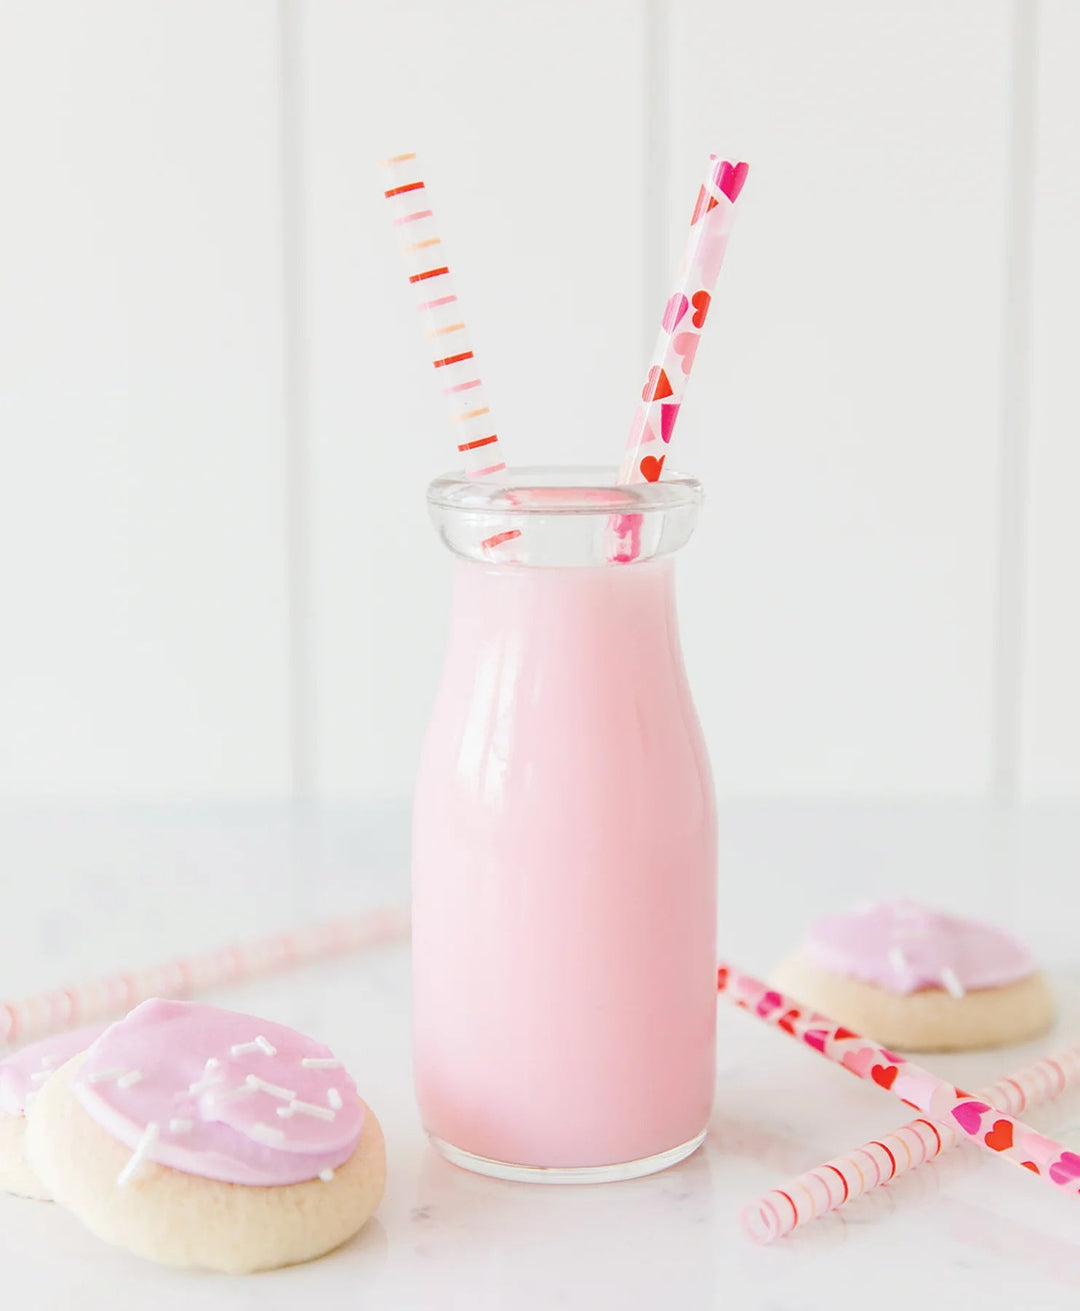 PINK HEART AND STRIPE REUSABLE STRAWS My Mind's Eye Bonjour Fete - Party Supplies